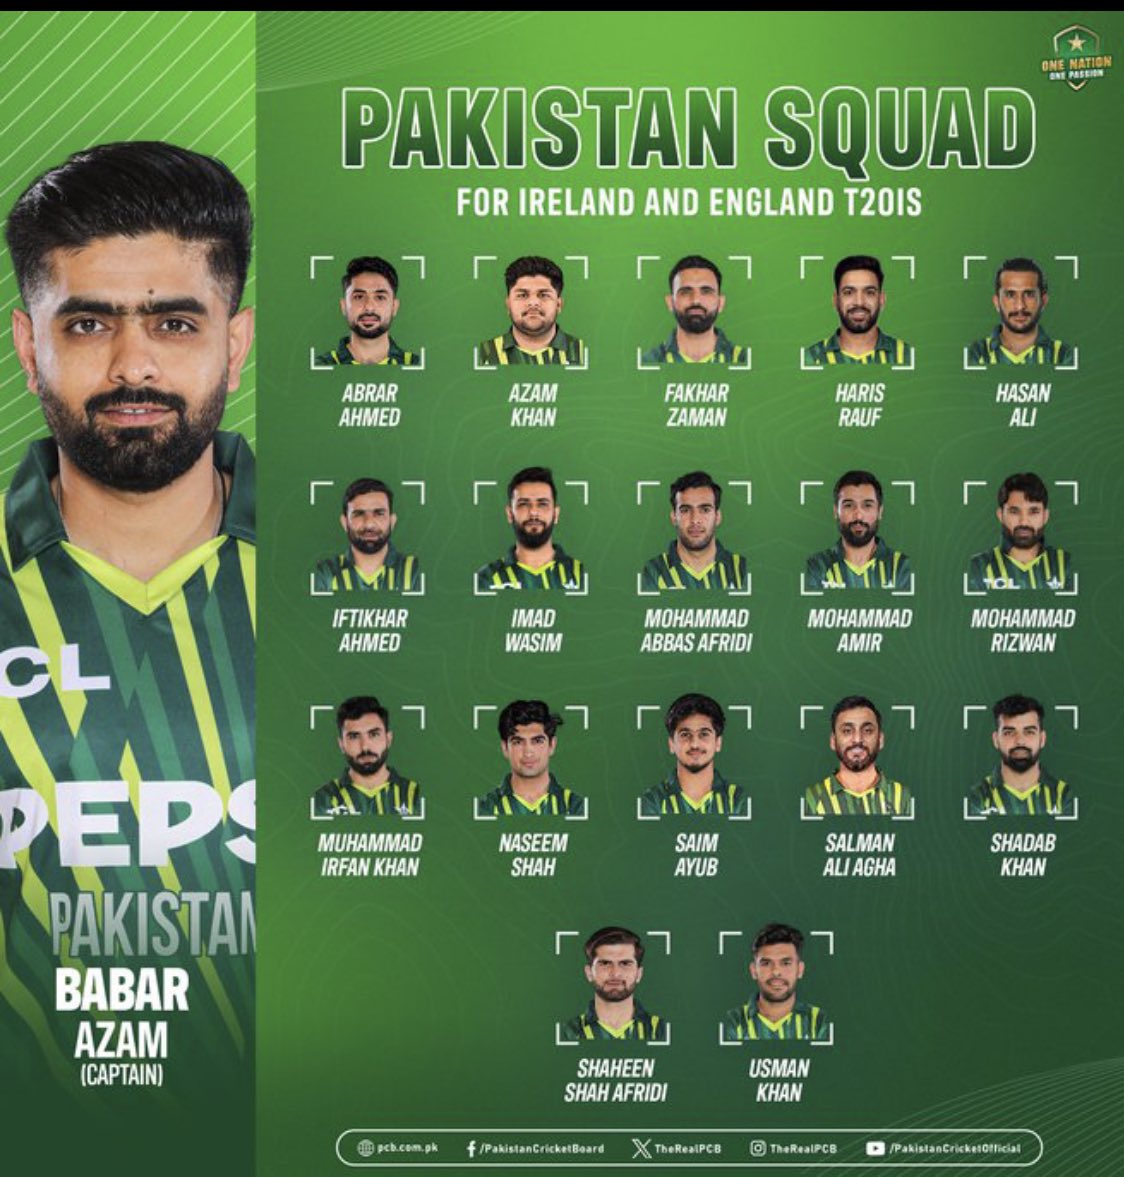 18 member squad for Ireland and England tour Hassan Ali and Haris Rauf are back! #PakistanCricket #BabarAzam